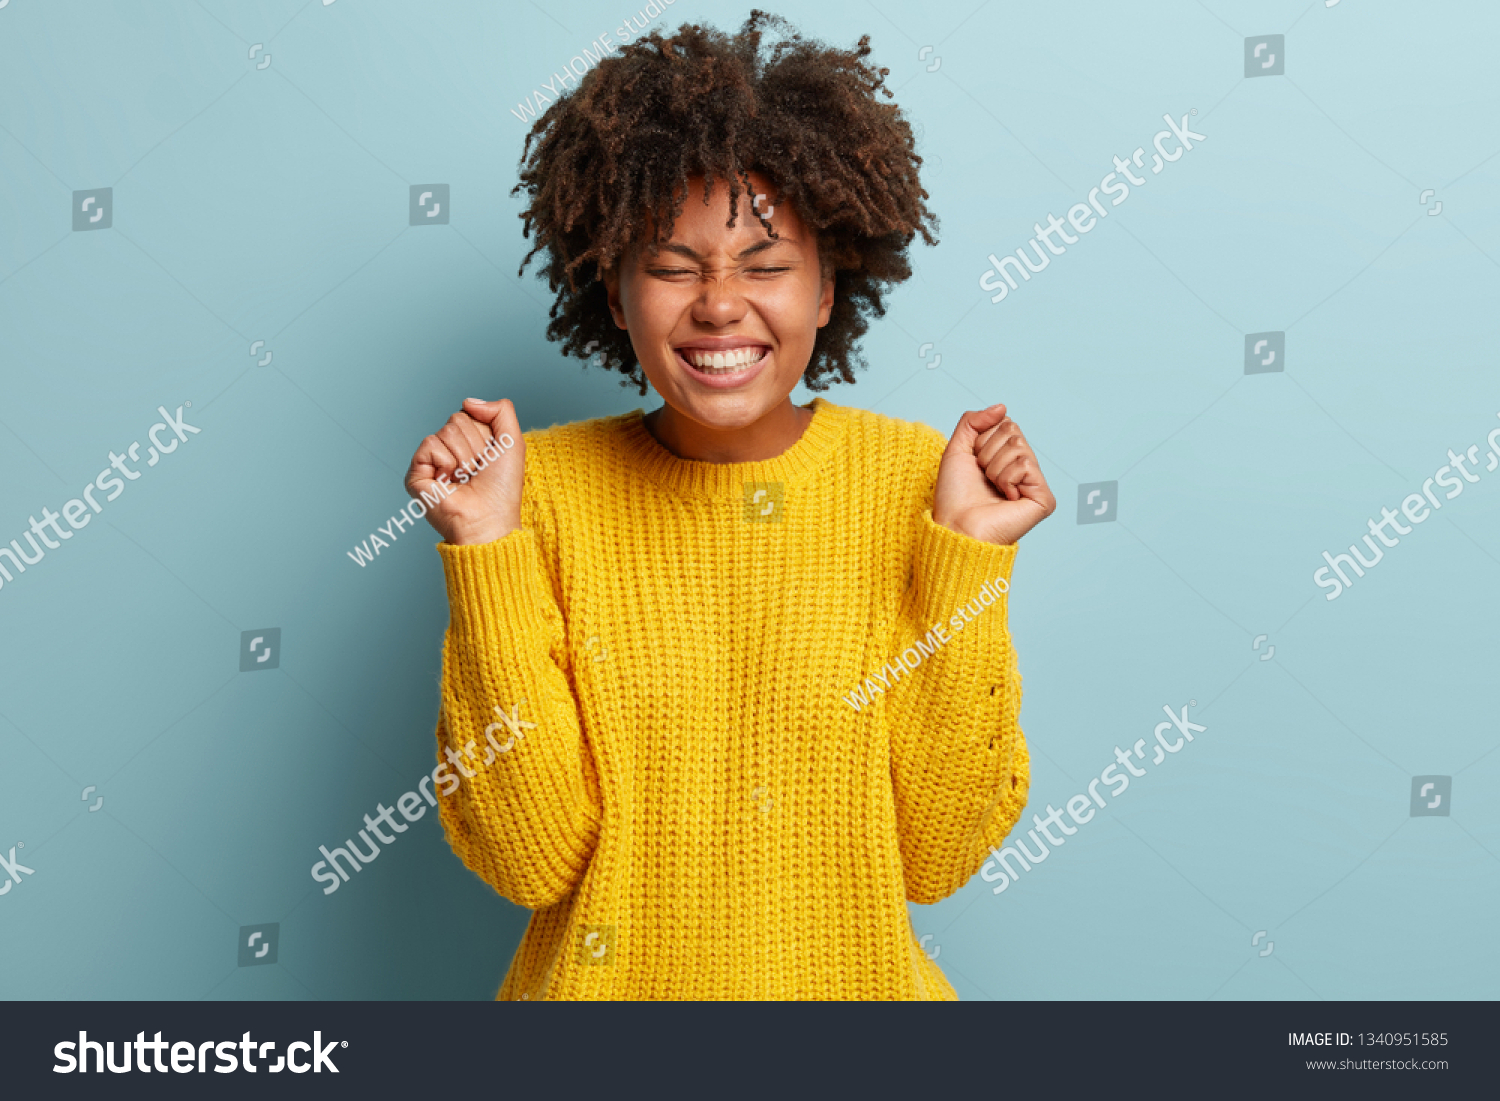 Overemotive triumphing woman squints face from excitement, clenches fists in victory, hears amazing good news, shows broad smile, wears oversized yellow jumper, gestures joyfully. Success concept #1340951585